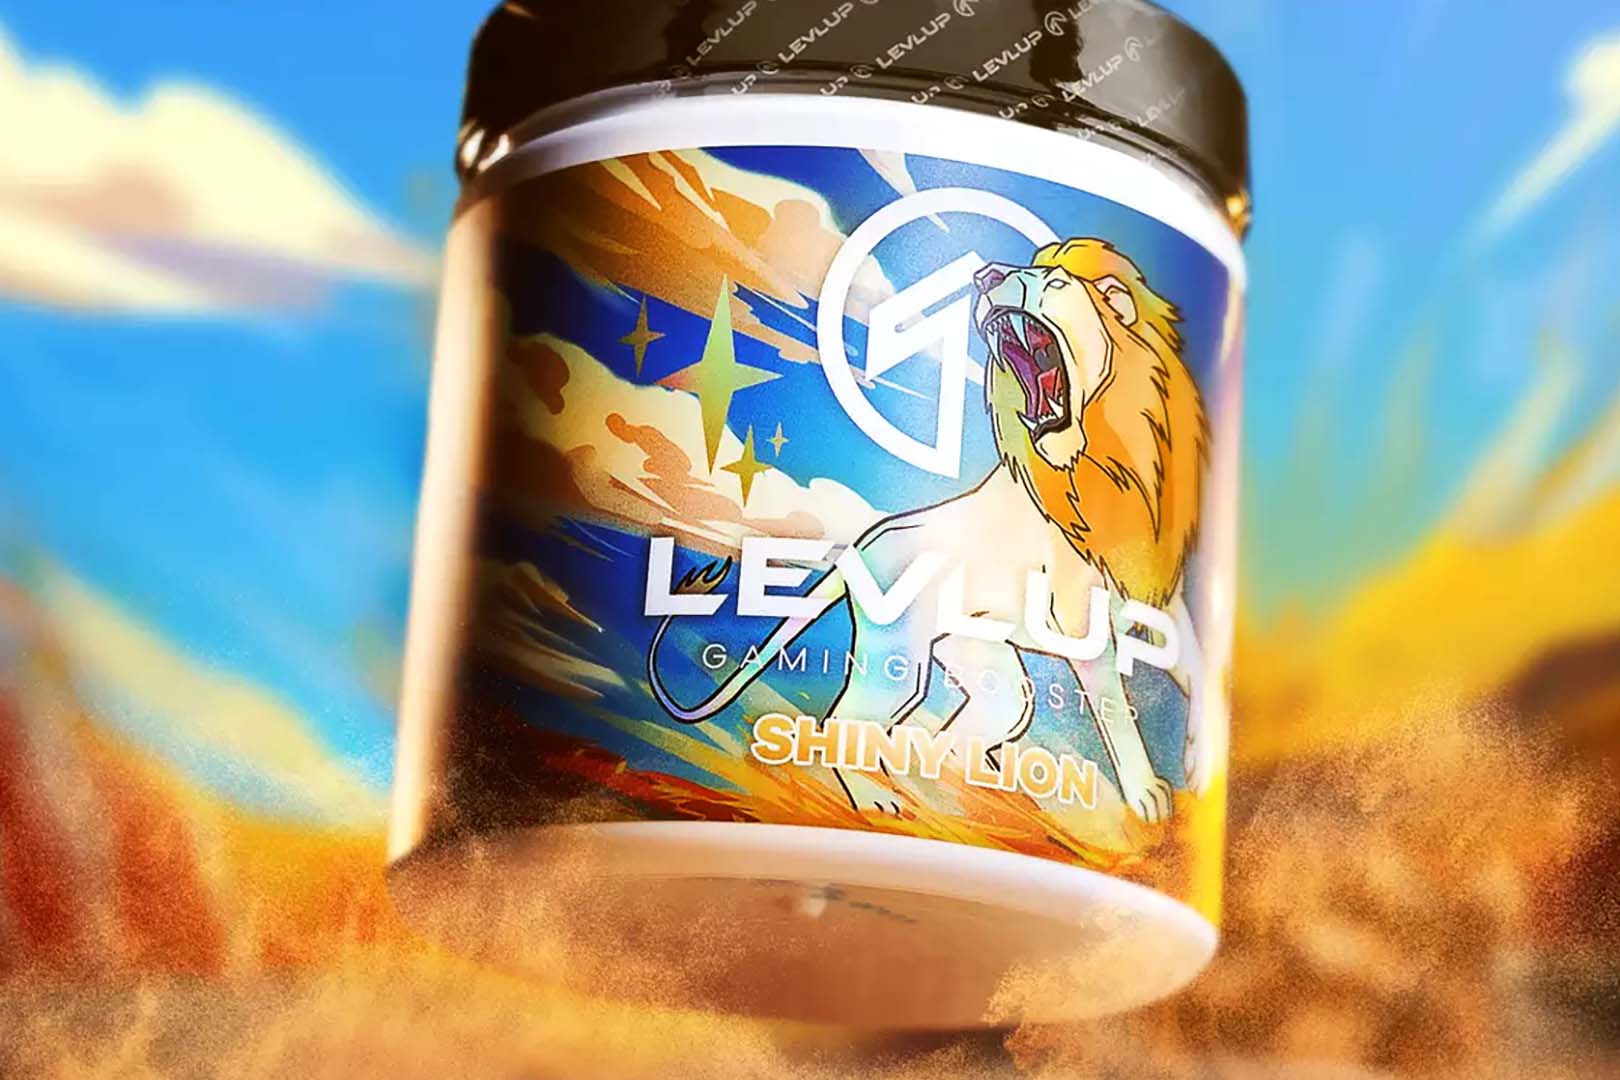 Levlup Shiny Lion Gaming Booster